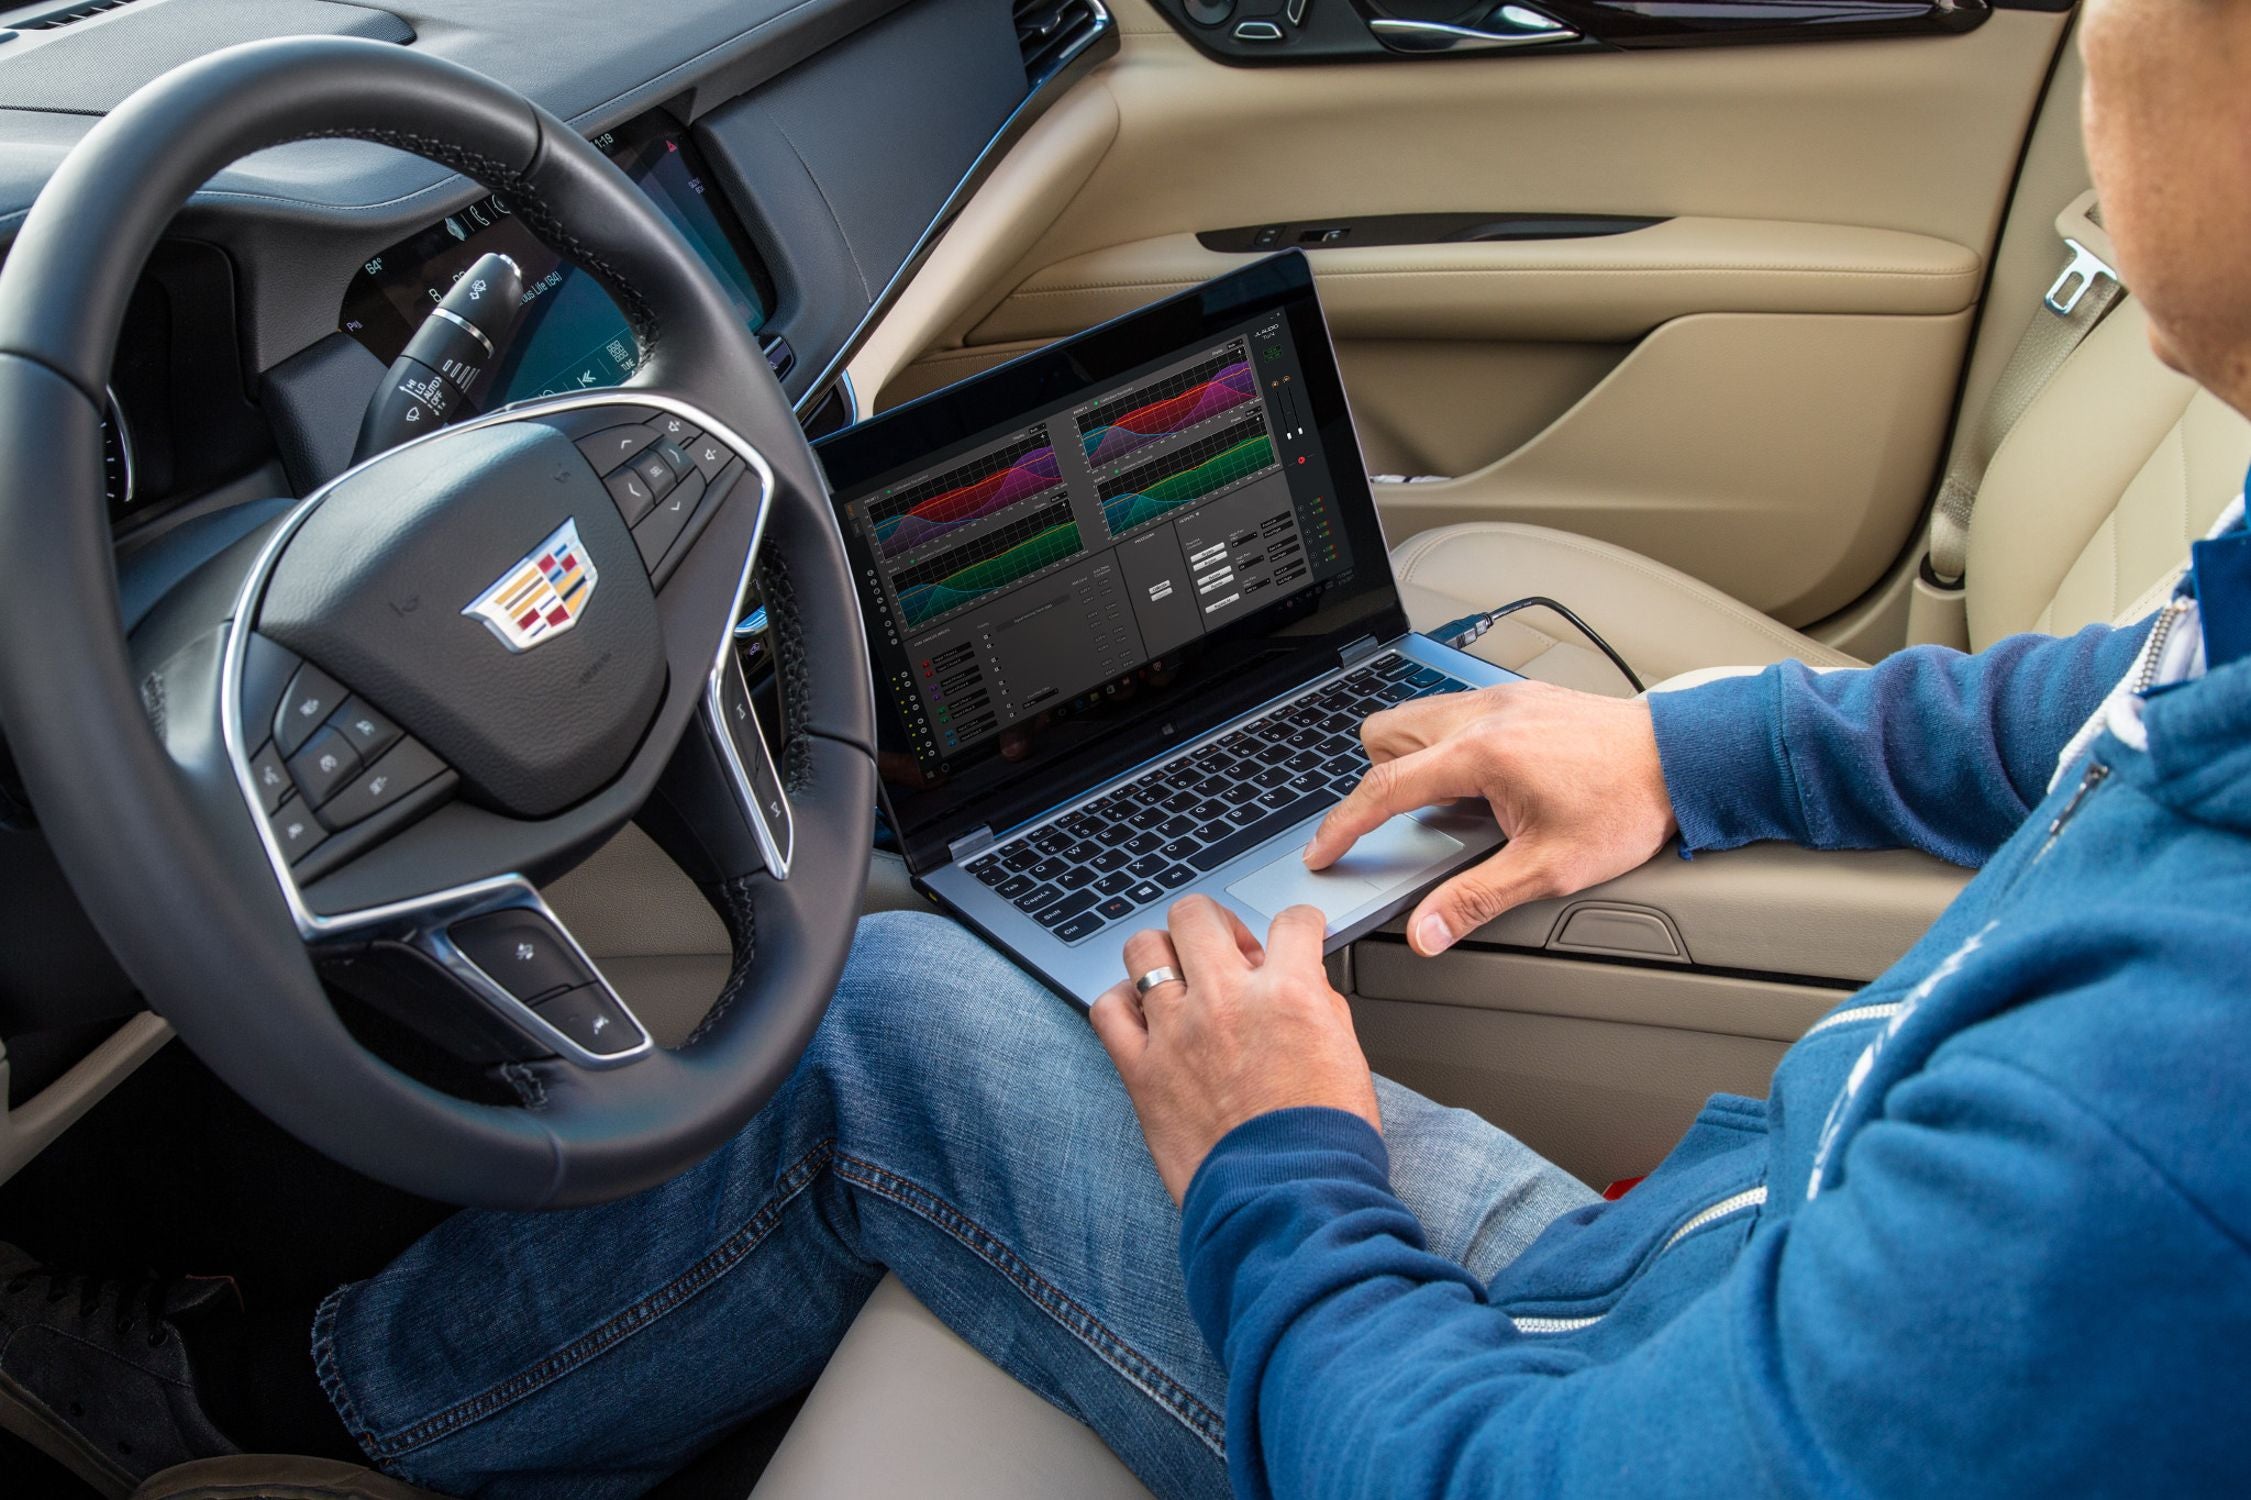 Hand on a Laptop Tuning a FiX-86 with TüN Software in a Cadillac